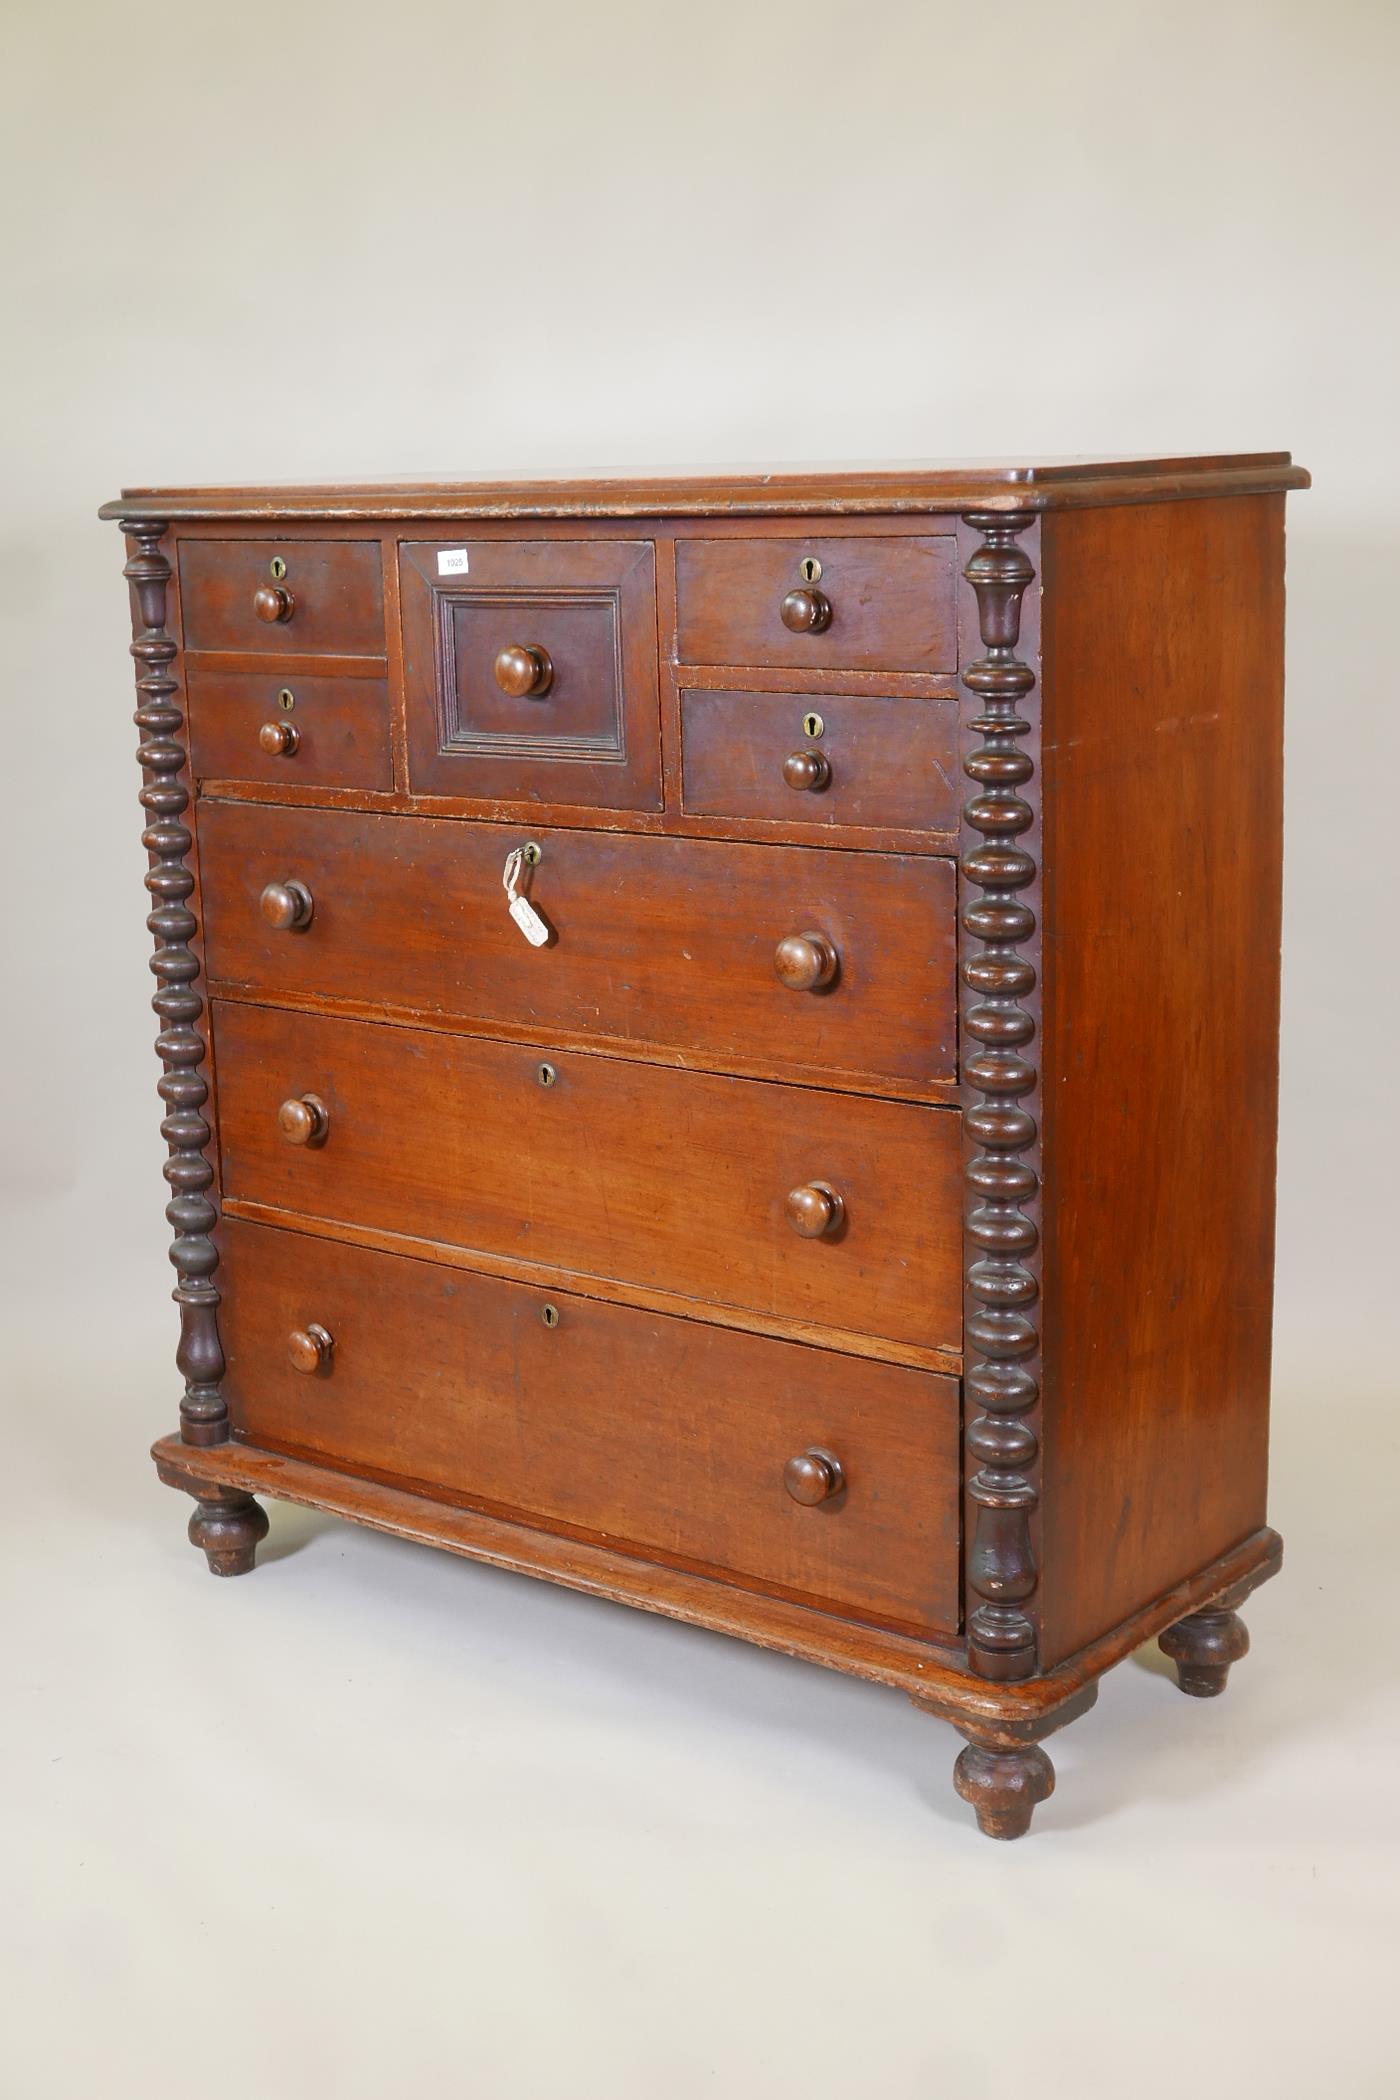 A C19th mahogany Scotch chest of drawers with bobbin turned side columns and four small top - Image 4 of 4